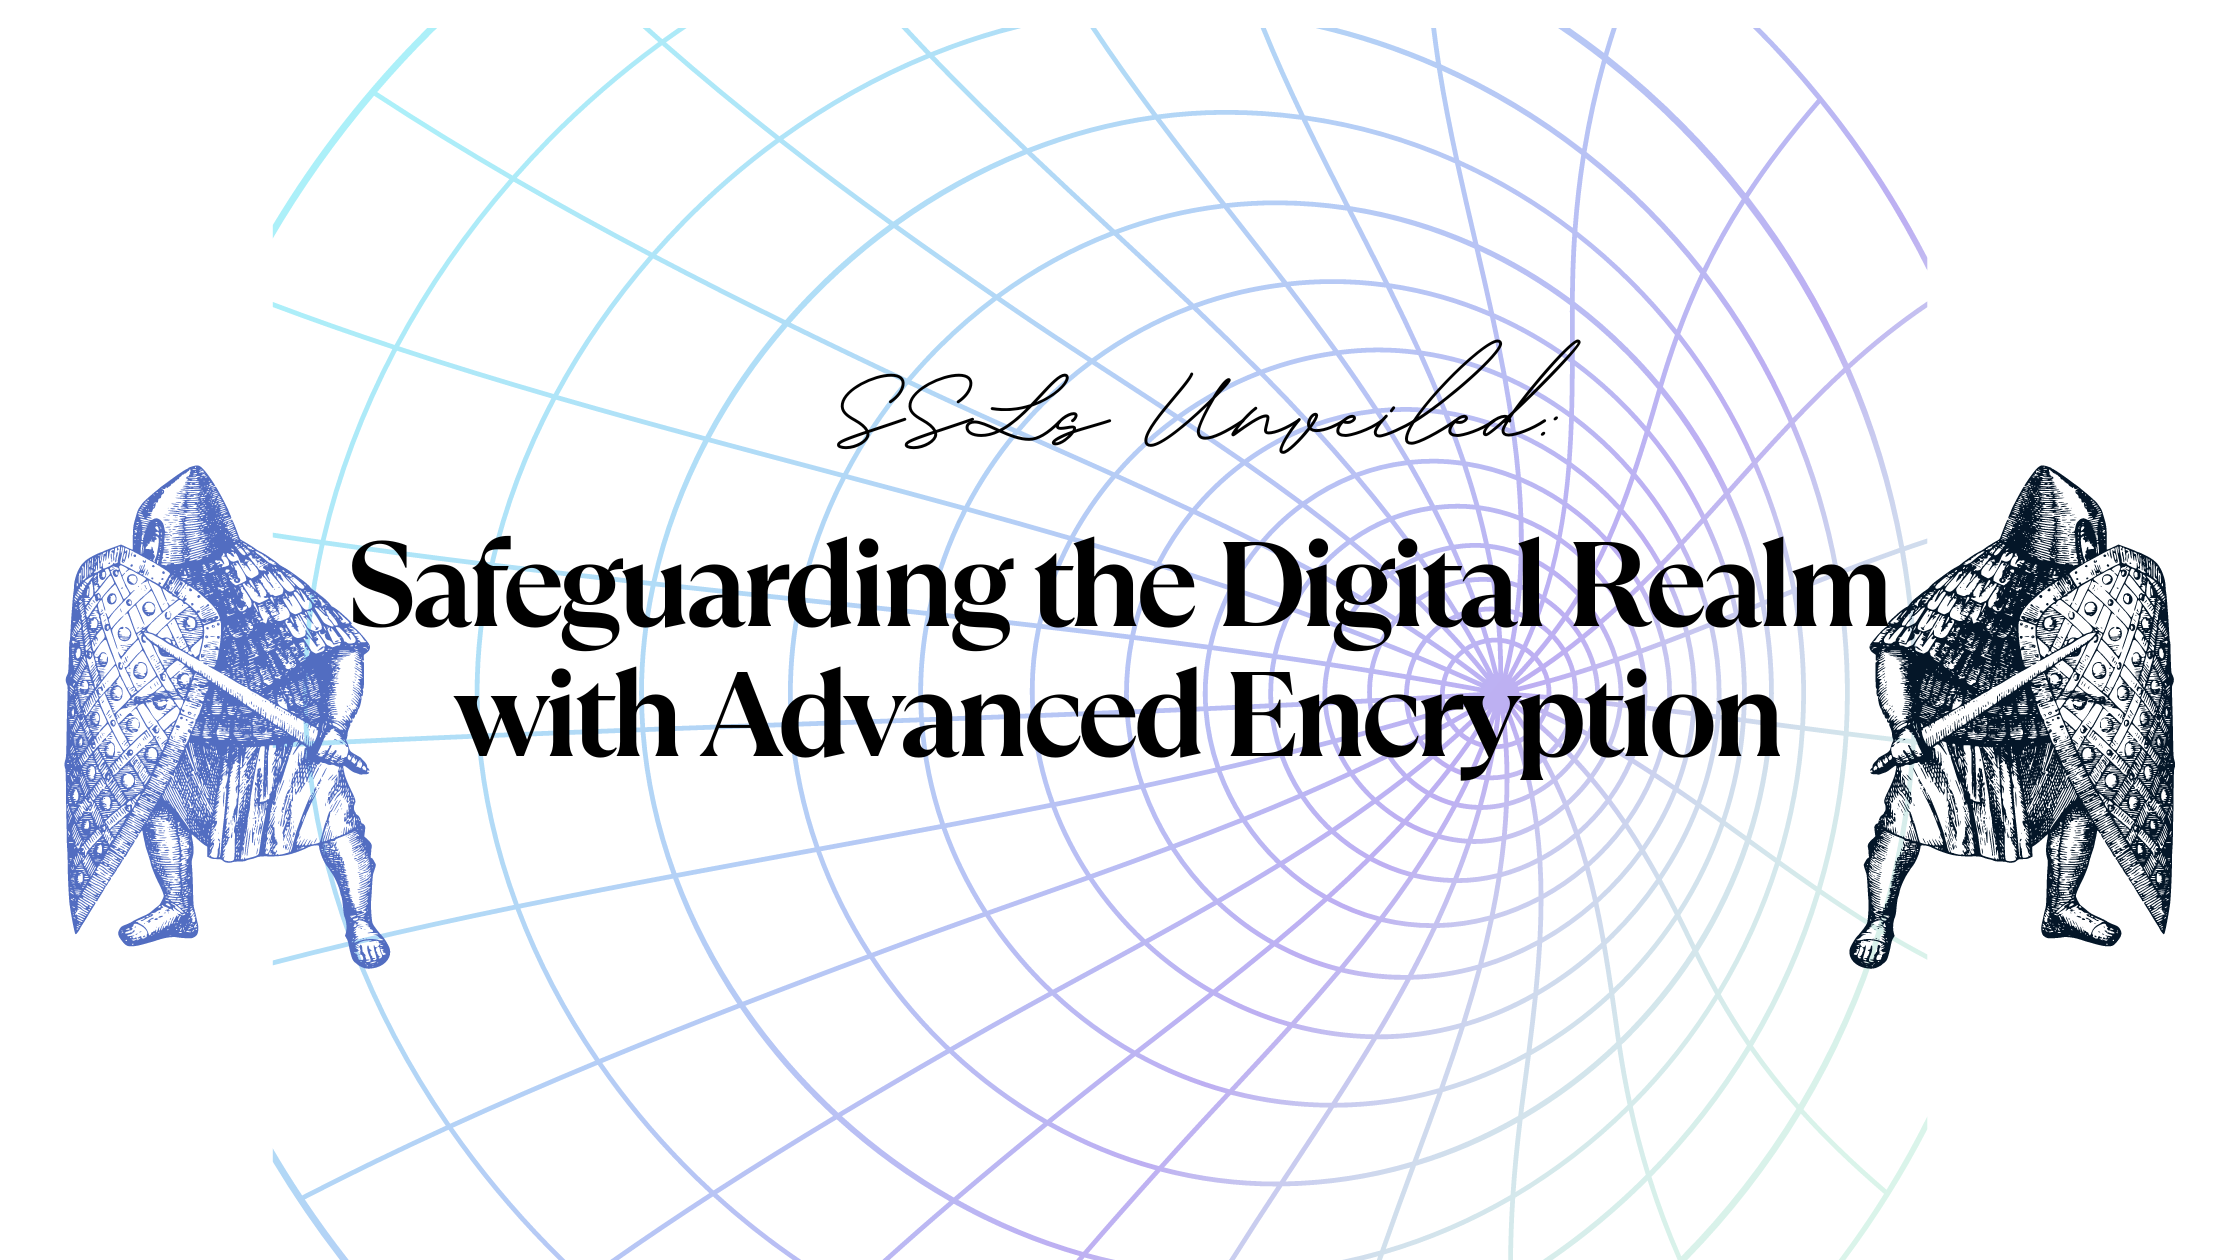 SSL Unveiled: Safeguarding the Digital Realm with Advanced Encryption